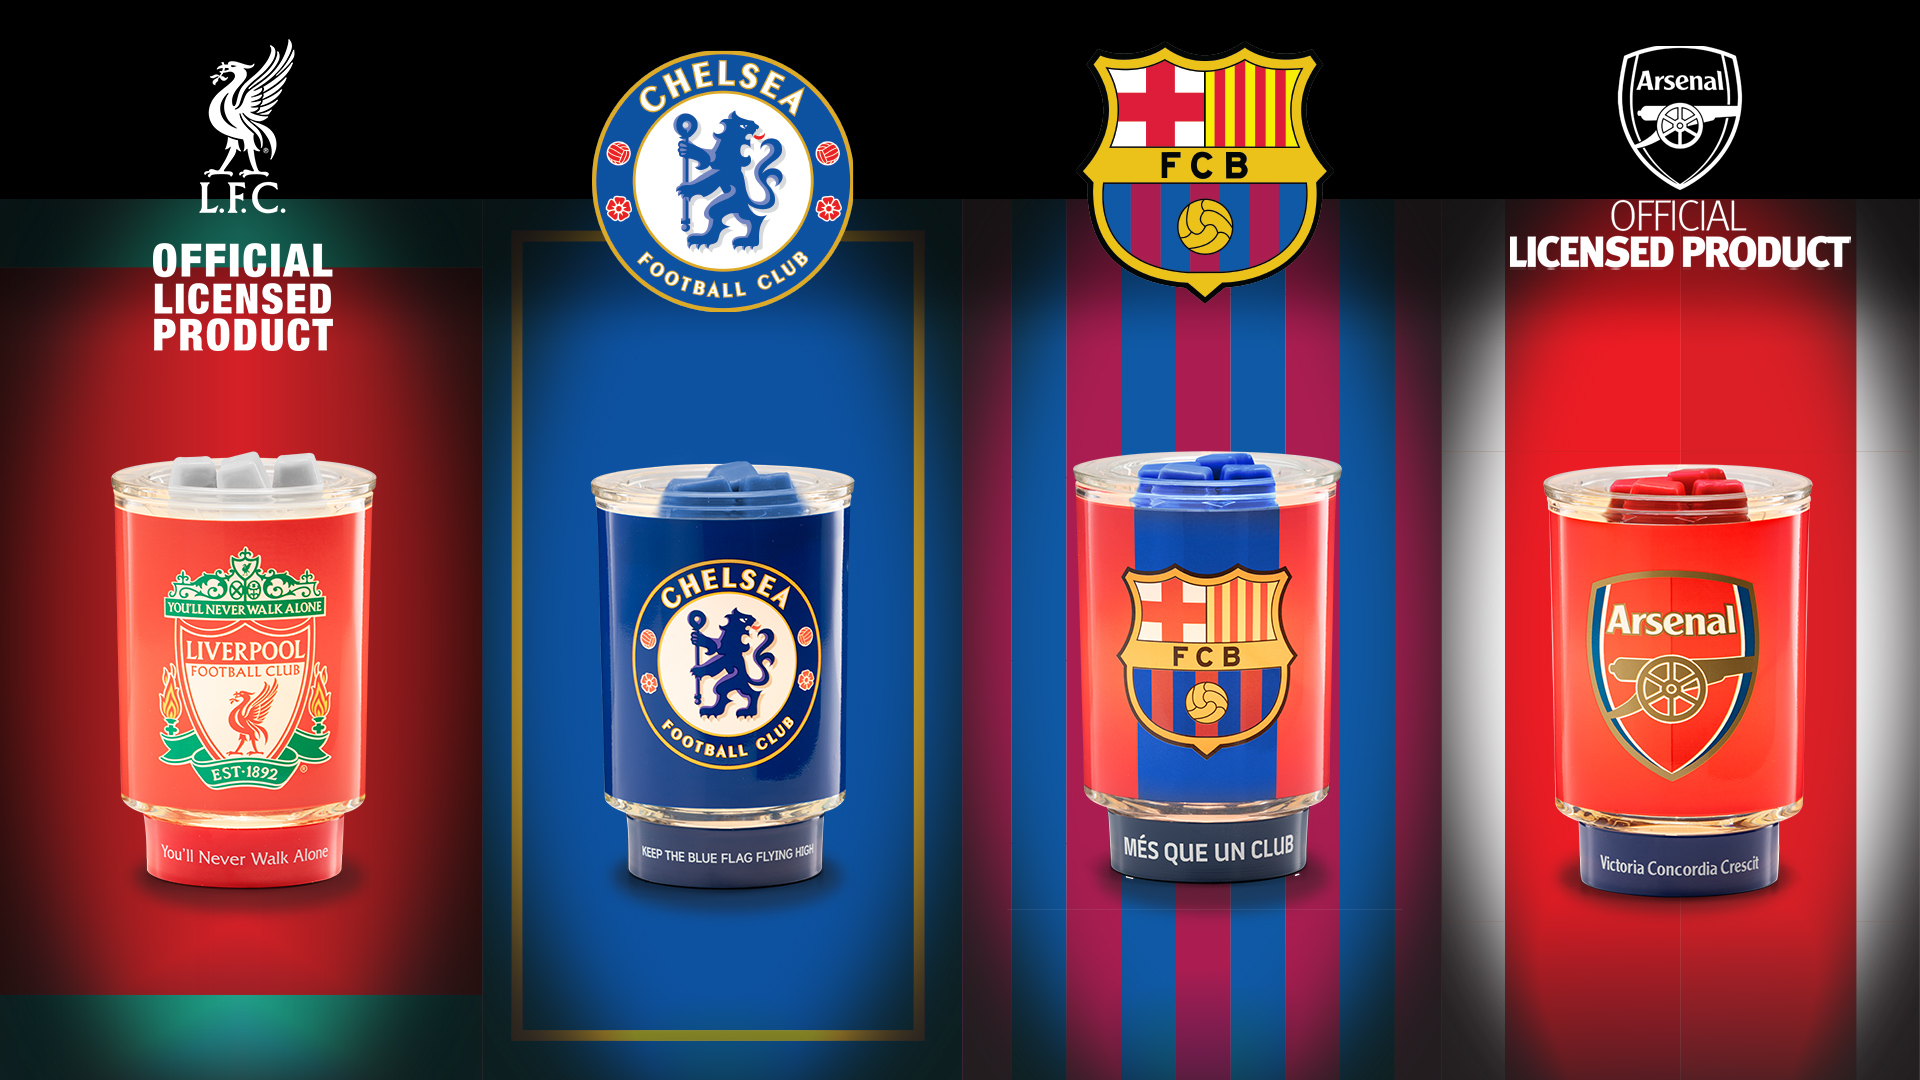 Scentsy to offer officially licensed European soccer club products